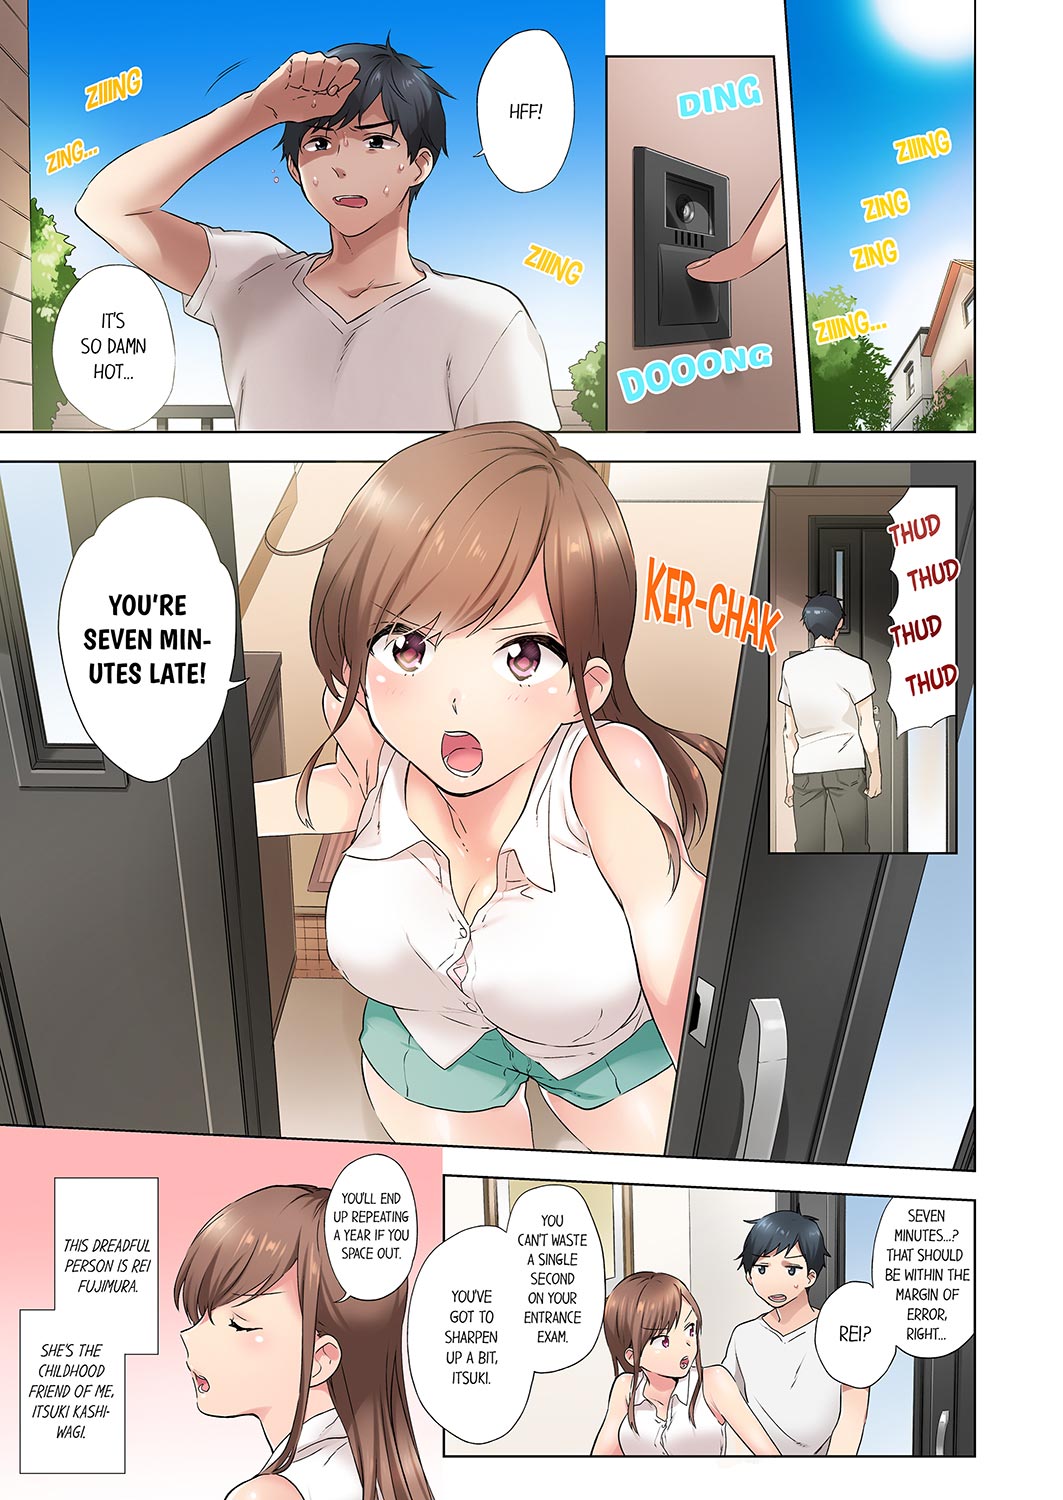 A Scorching Hot Day with A Broken Air Conditioner - Chapter 1 Page 1